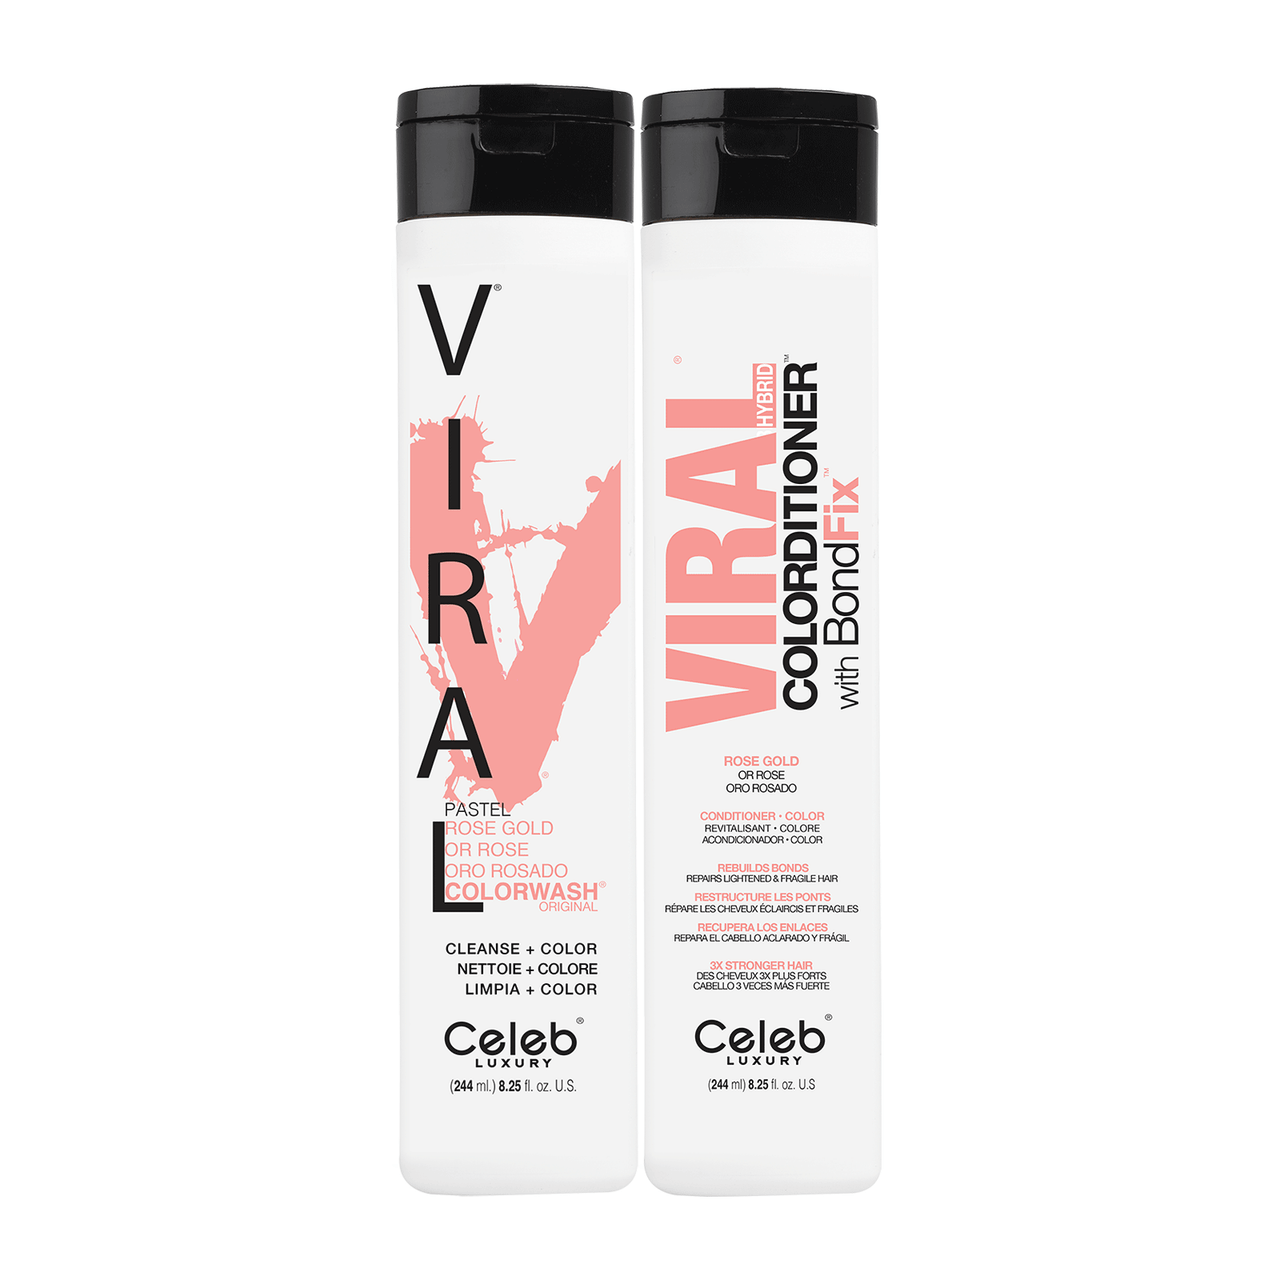 Celeb Luxury Viral Rose Gold Colorwash & Colorditioner Duo